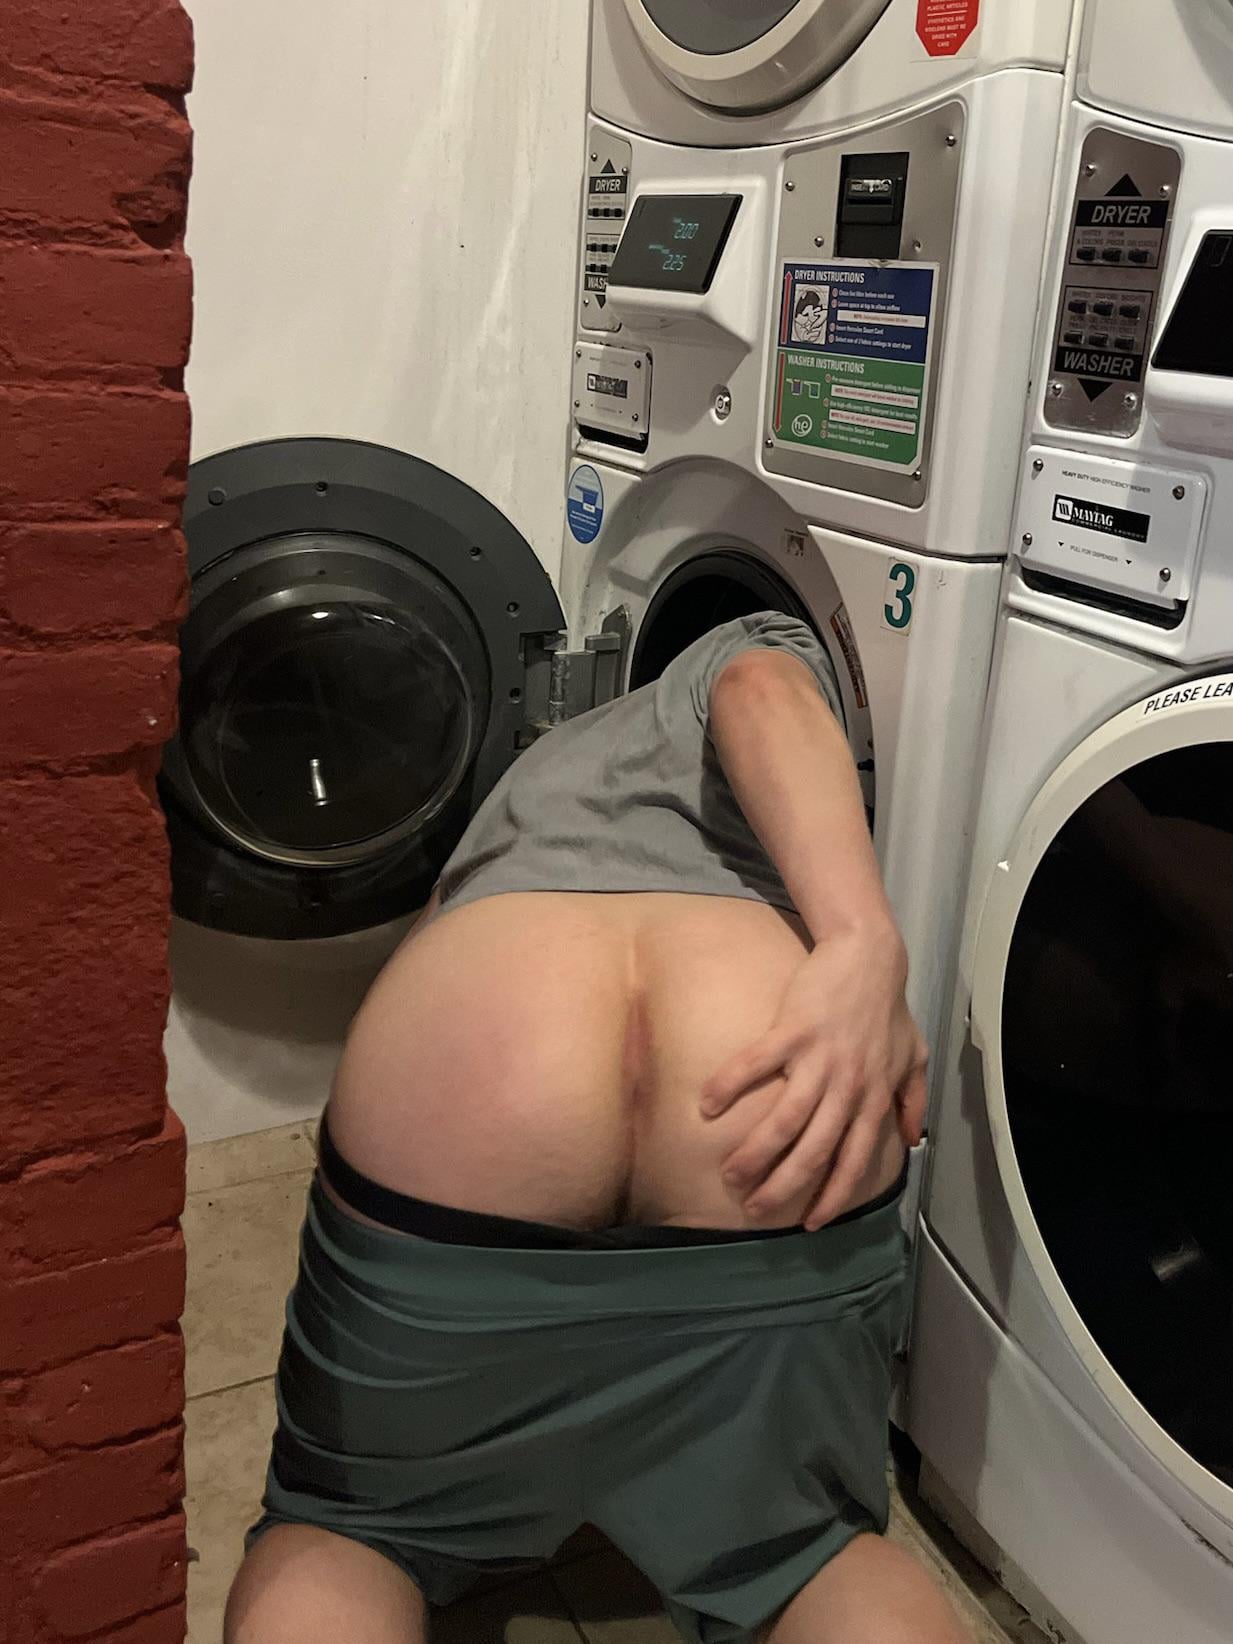 Laundry day in the basement of the frat apts